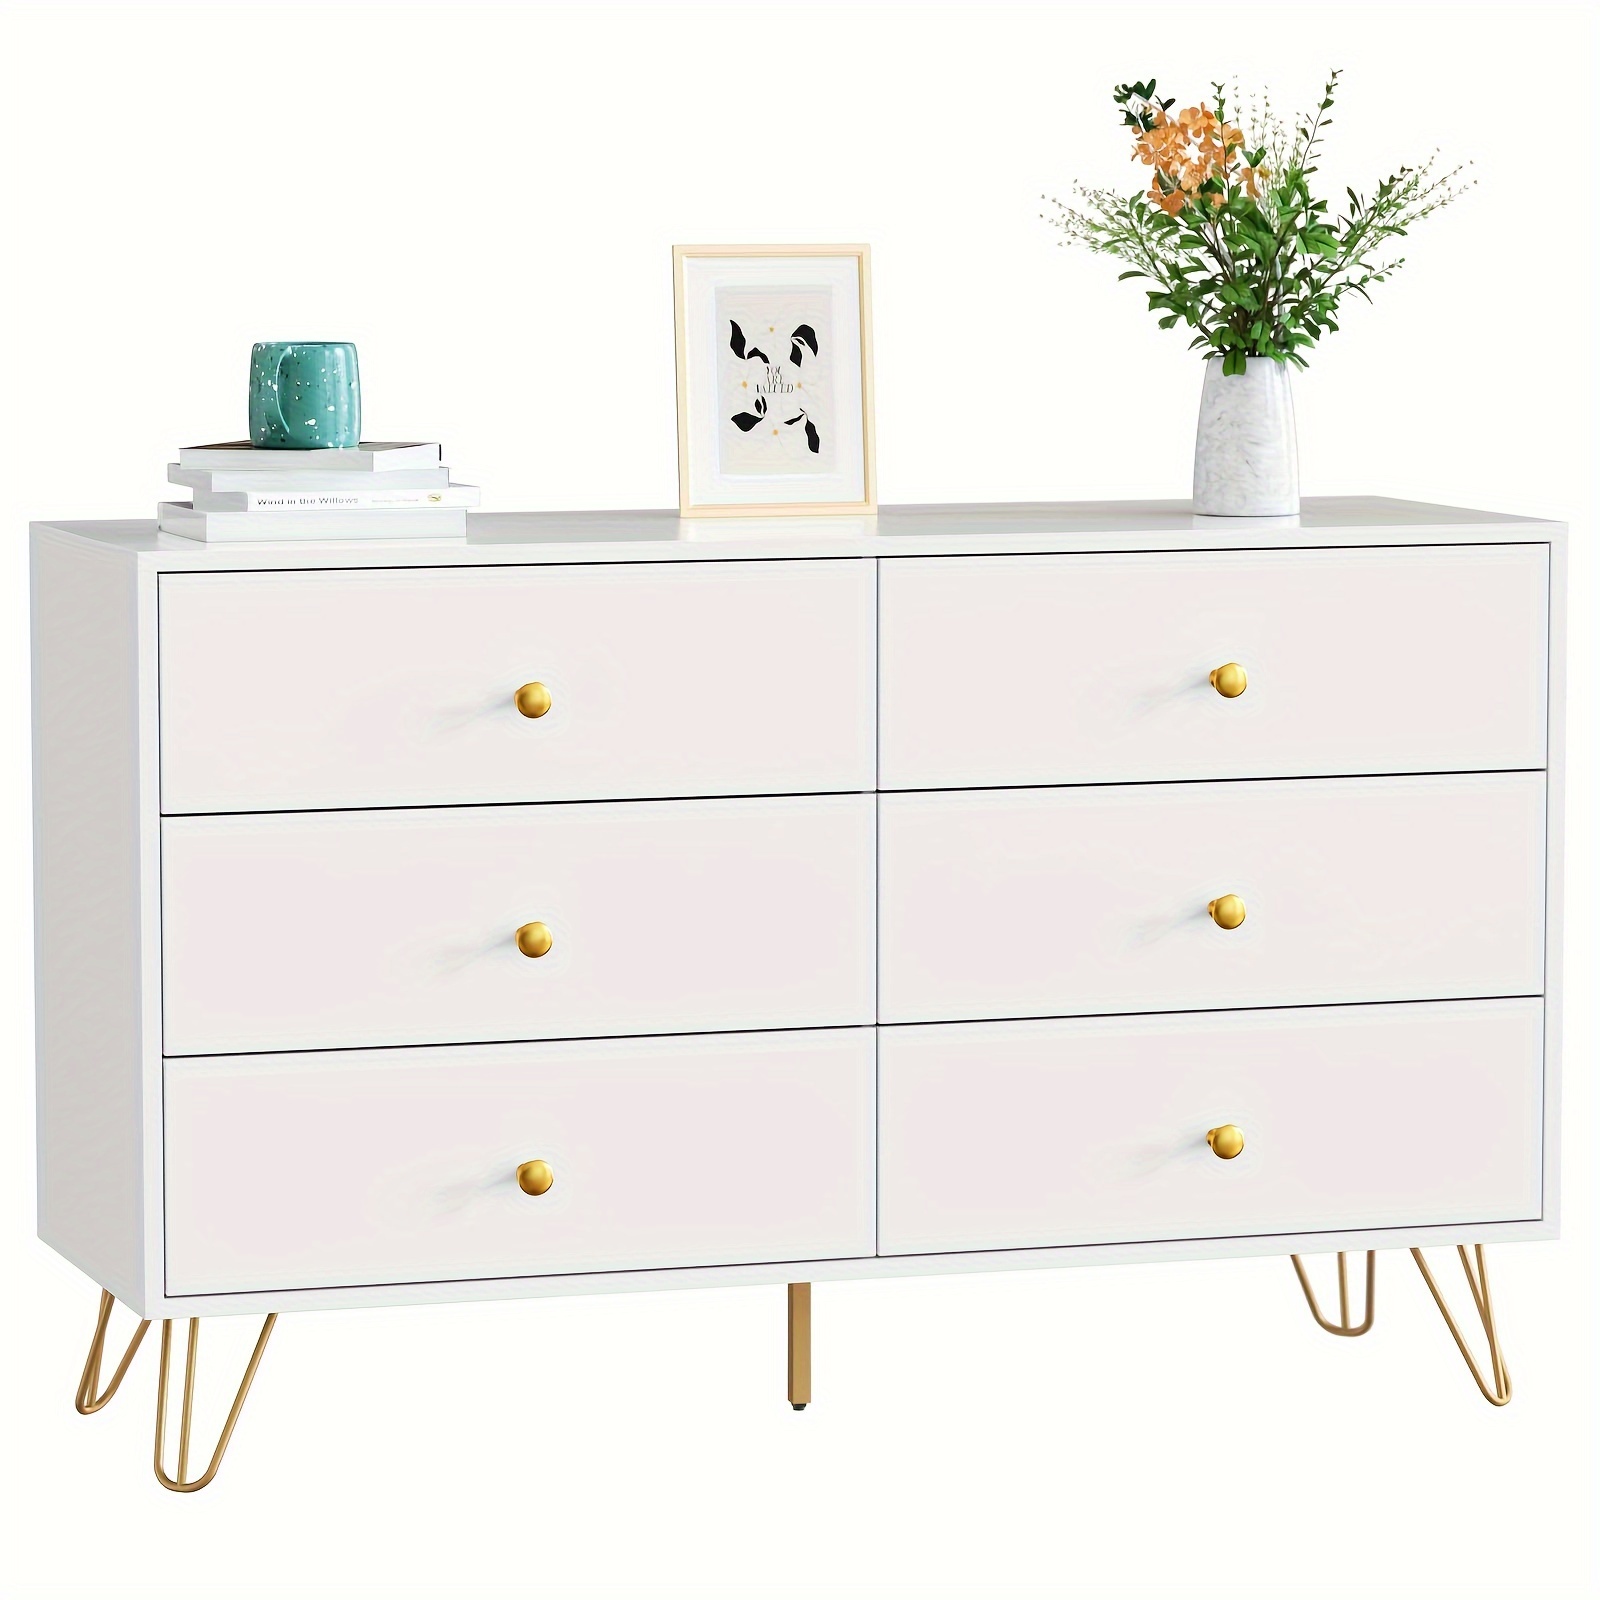 

Carpetnal Dresser For Bedroom, 6 Drawer Dresser With Wide Drawers And Gold Metal Handles, Wood Dressers & Chest Of Hallway, Entryway.